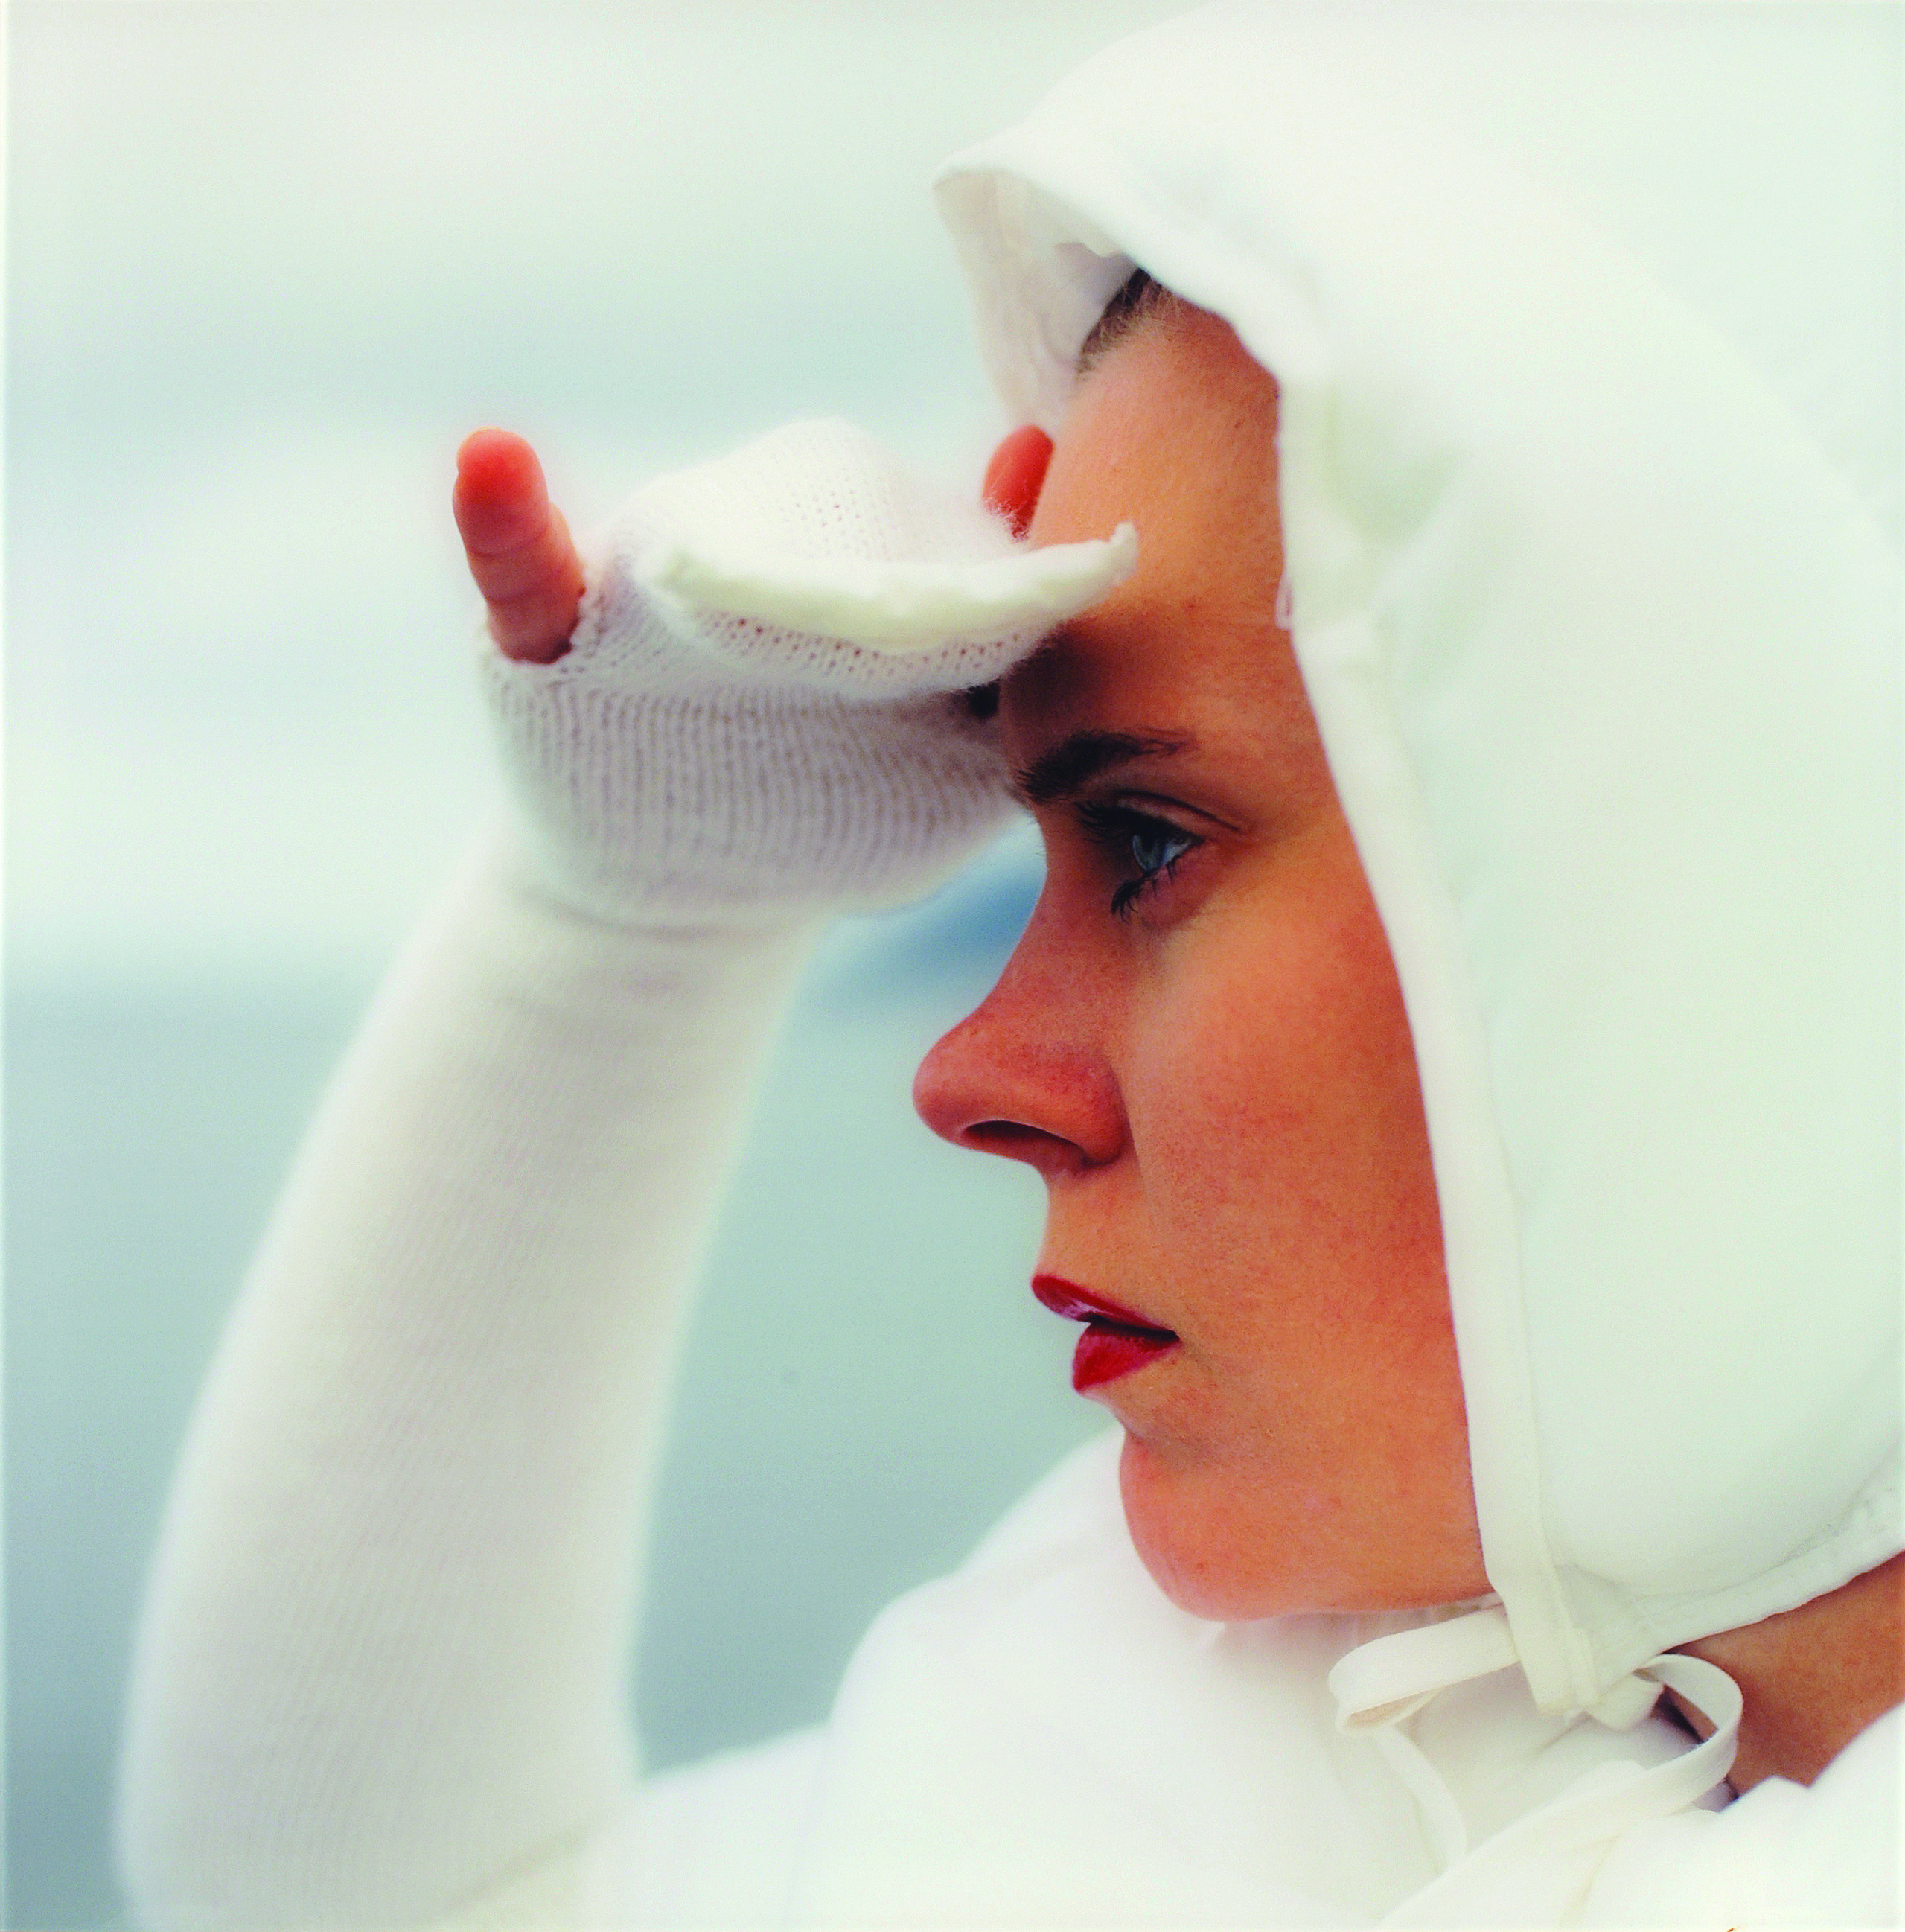 Square close-up of a light-skinned woman in profile looking to the left, seen from the shoulders up. She wears all white, including a bonnet and knit sleeves that become gloves covering her three middle fingers, and she holds her right hand up as if shielding her eyes from the sun.